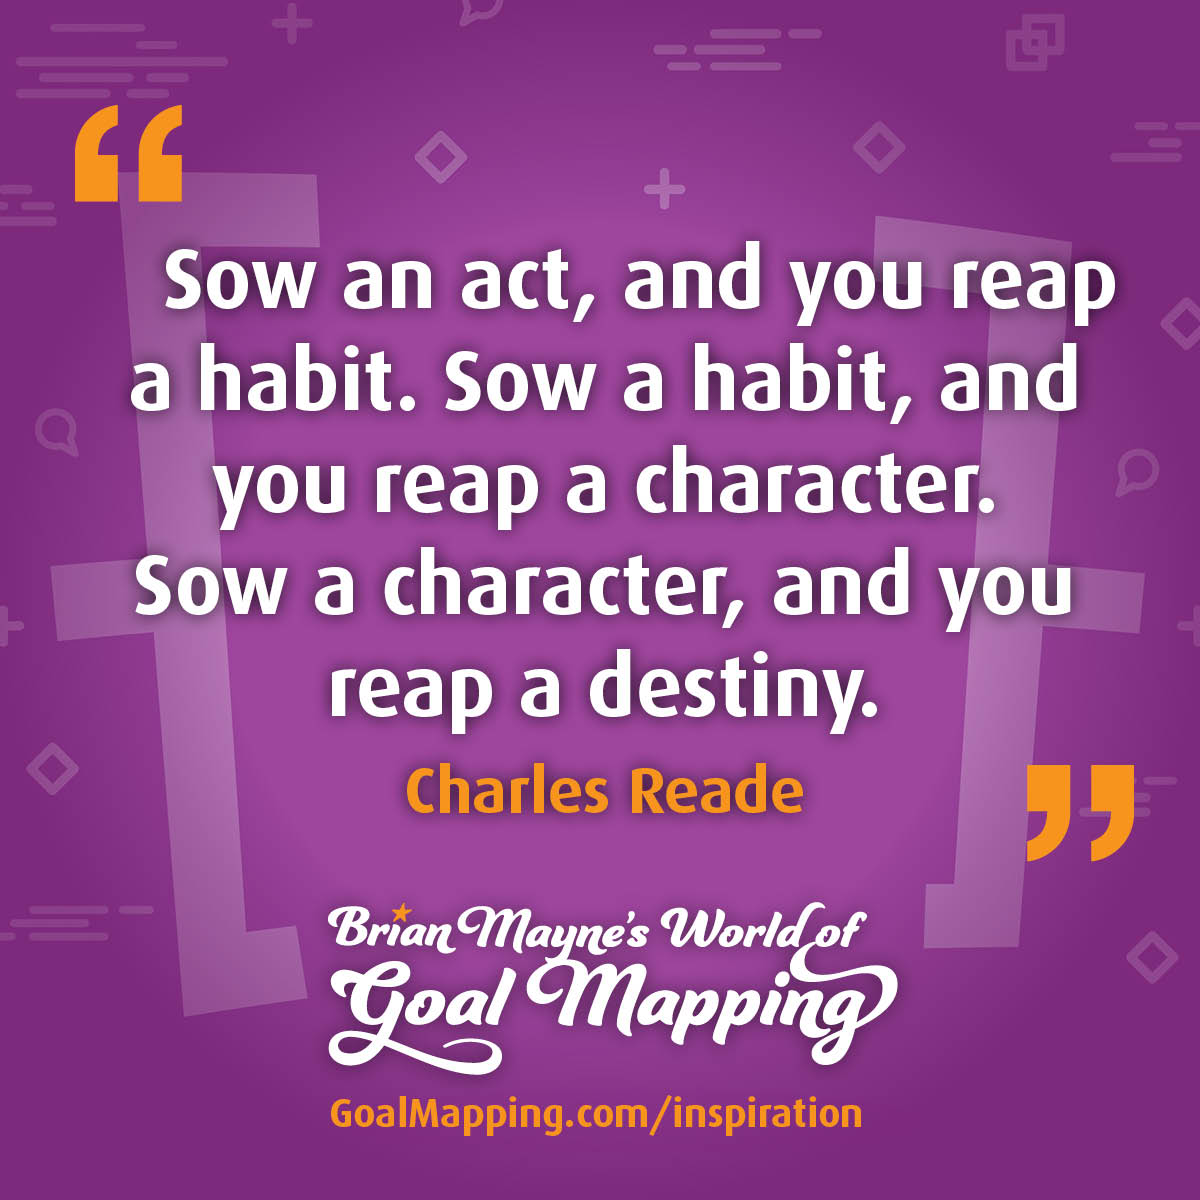 "Sow an act, and you reap a habit. Sow a habit, and you reap a character.Sow a character, and you reap a destiny." Charles Reade